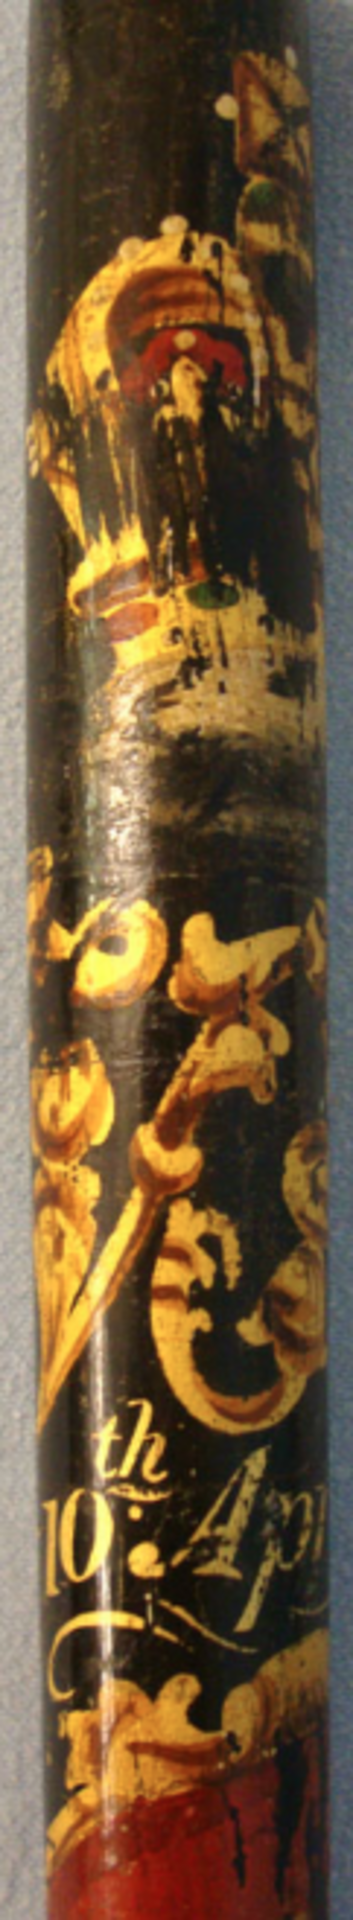 Kennington Common 10th April 1848 Chartist Mass Meeting Riots Special Constable Decorated Truncheon - Image 2 of 3